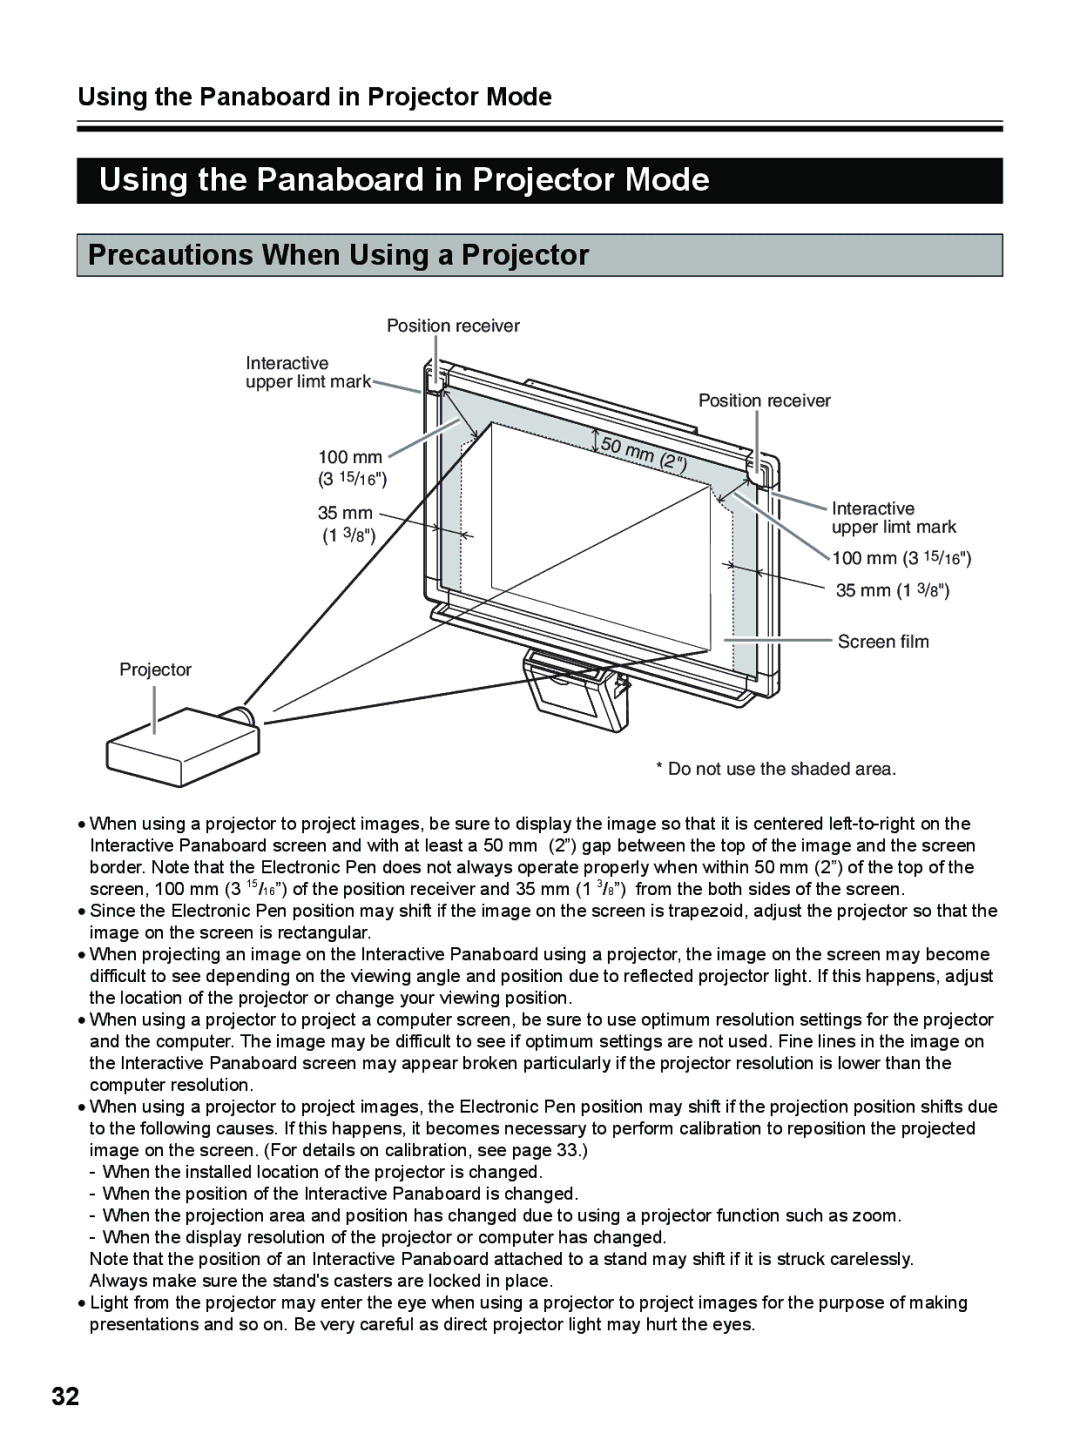 Panasonic UB-8325 operating instructions Using the Panaboard in Projector Mode, Precautions When Using a Projector 